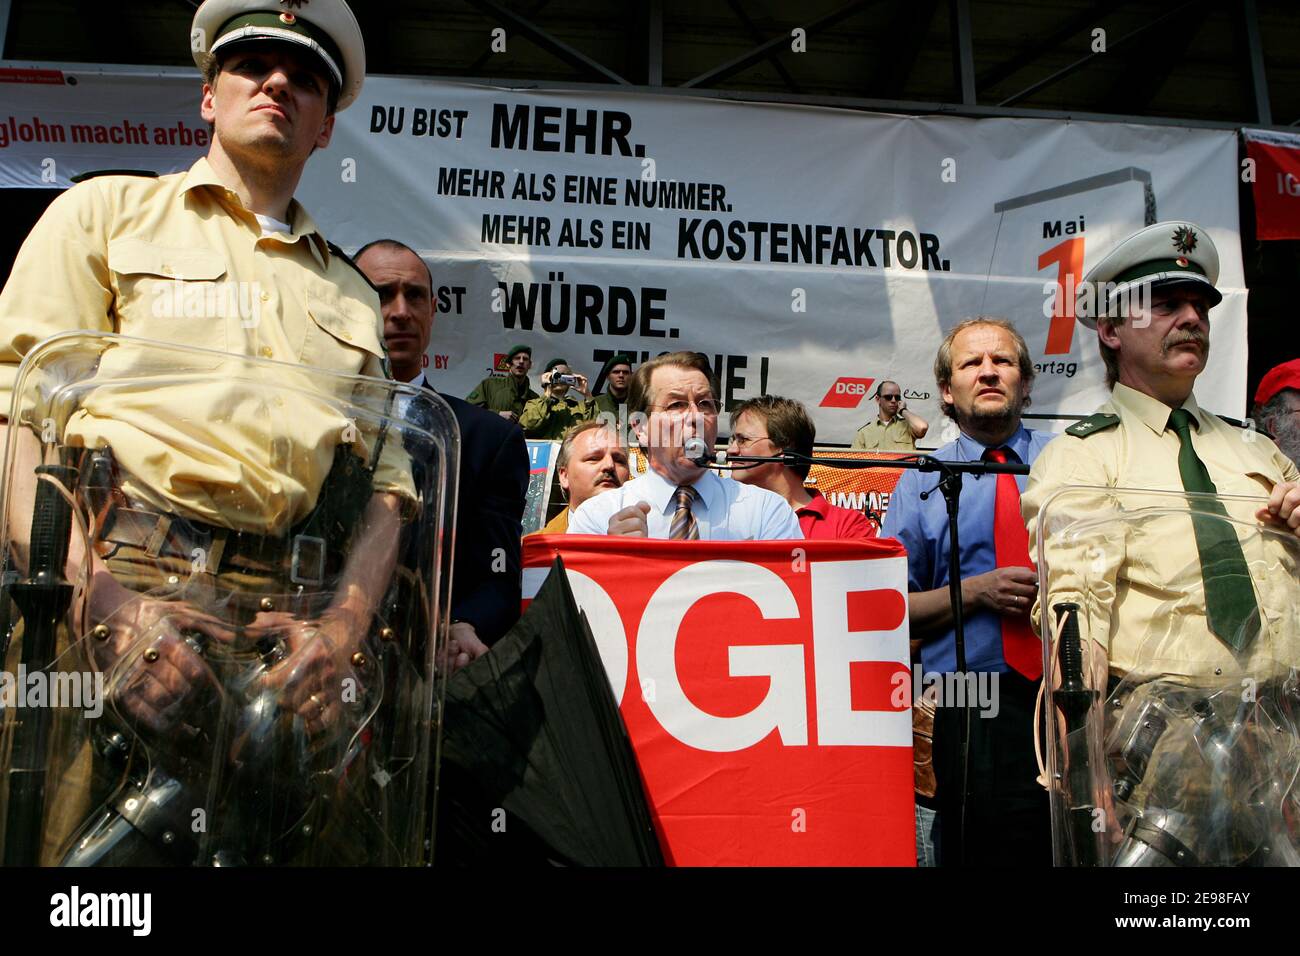 SPD chairman Franz Müntefering has joined the march of the May Day rally of the German Federation of Trade Unions. The destination of the procession is the Landschaftspark Nord in Duisburg, where he spoke amid strong protests from the audience. Flying eggs were repelled by police officers with their shields. Müntefering then takes a tour of the stands of the trade union groups, where he has a beer with some comrades. Stock Photo